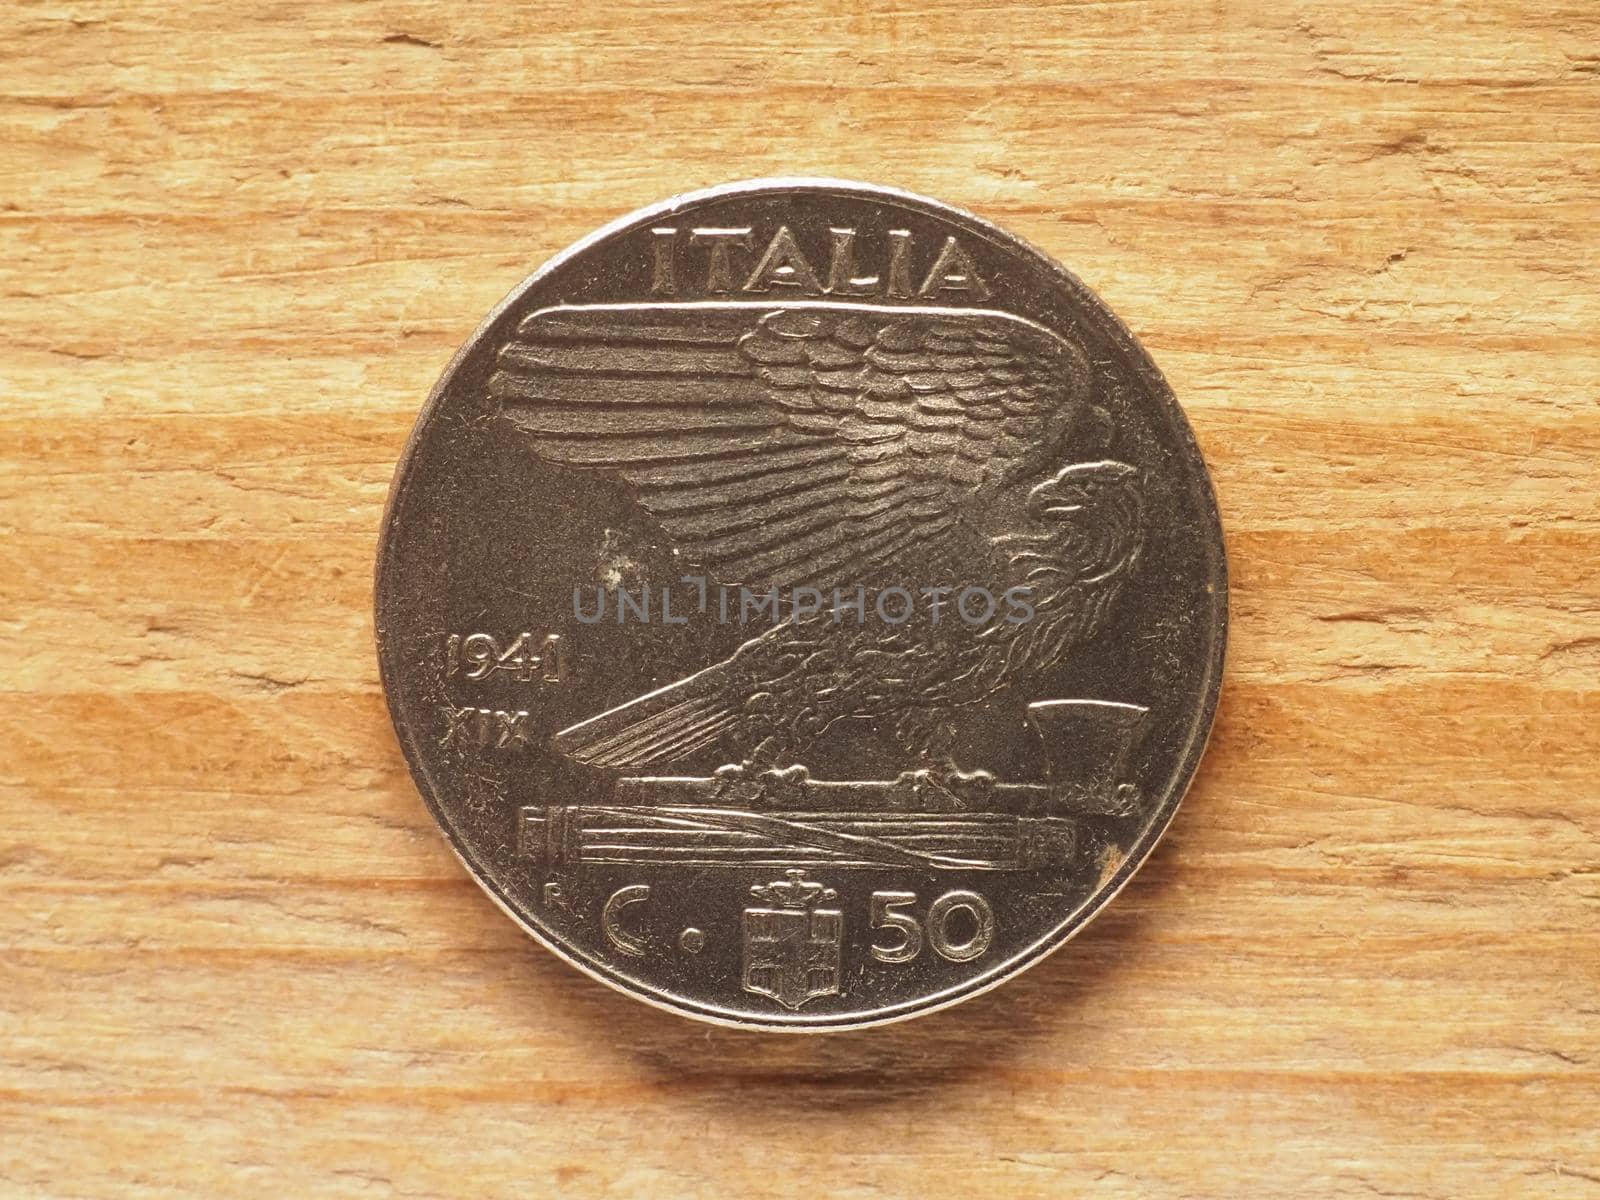 50 cent coin reverse showing eagle, currency of Italy by claudiodivizia